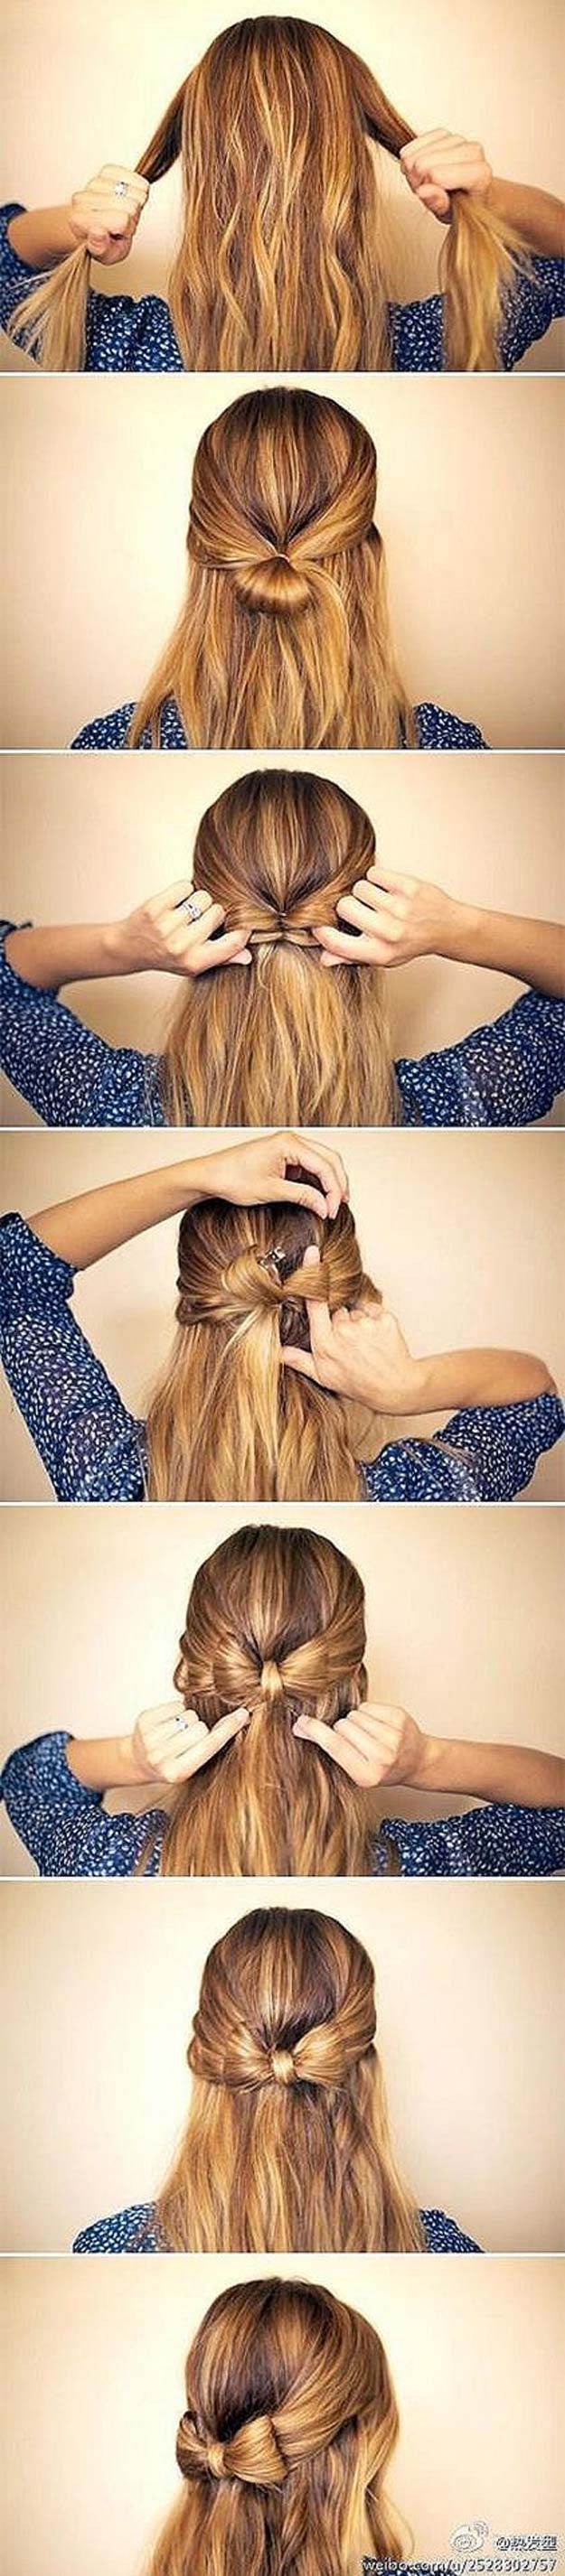 Best Hairstyles for Long Hair - Half Up Ribbon Hairstyle - Step by Step Tutorials for Easy Curls, Updo, Half Up, Braids and Lazy Girl Looks. Prom Ideas, Special Occasion Hair and Braiding Instructions for Teens, Teenagers and Adults, Women and Girls 